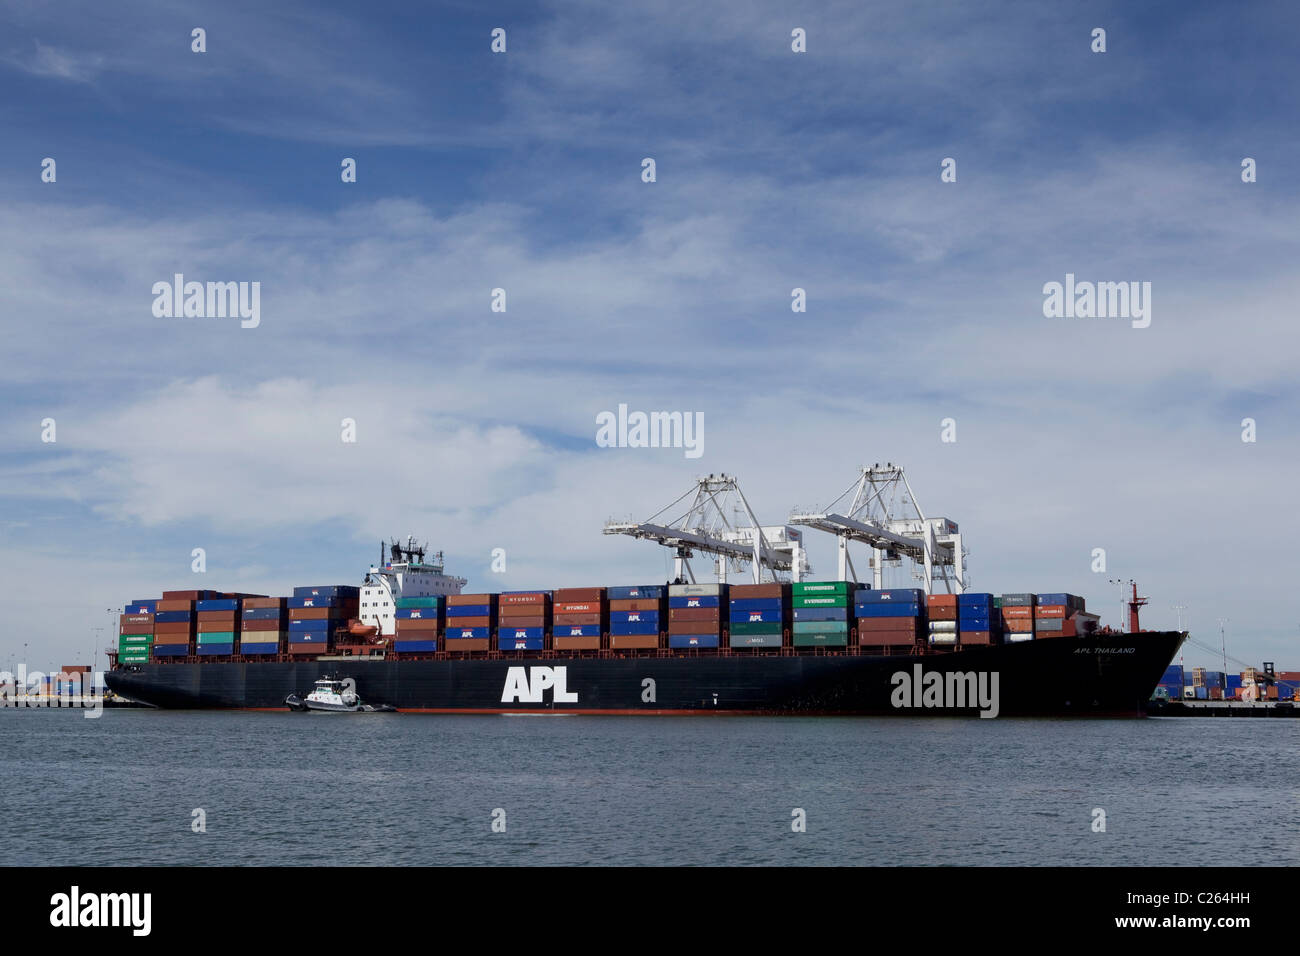 An APL container ship getting loaded - San Francisco, California USA Stock Photo